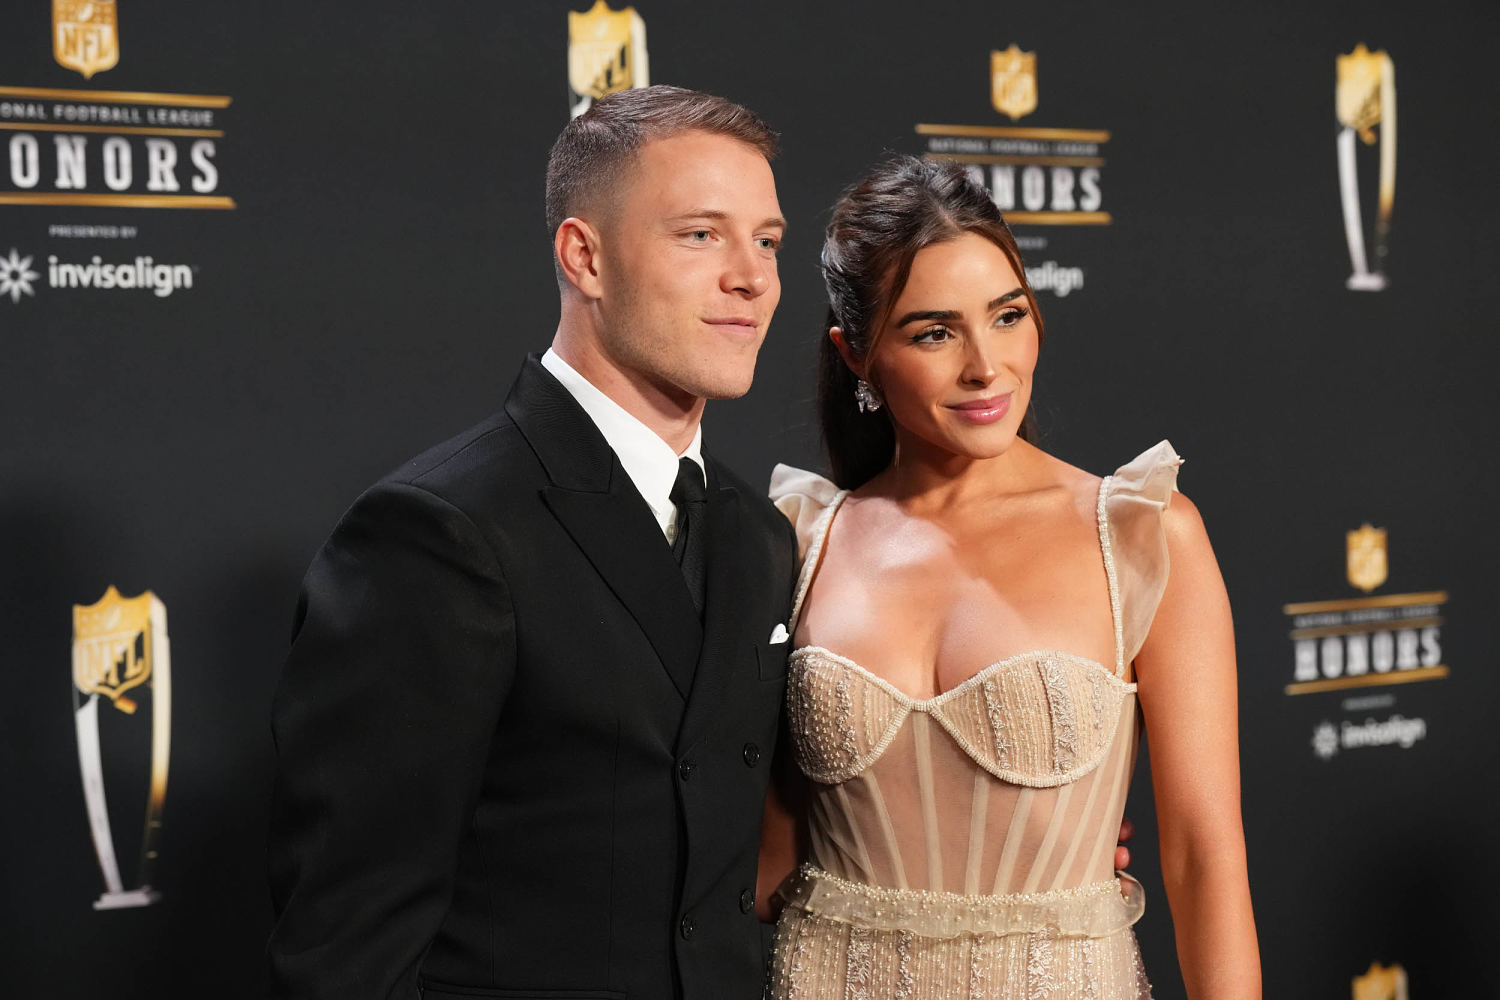 Christian McCaffrey slams criticism of wife Olivia Culpo’s wedding dress: ‘What an evil thing to post’